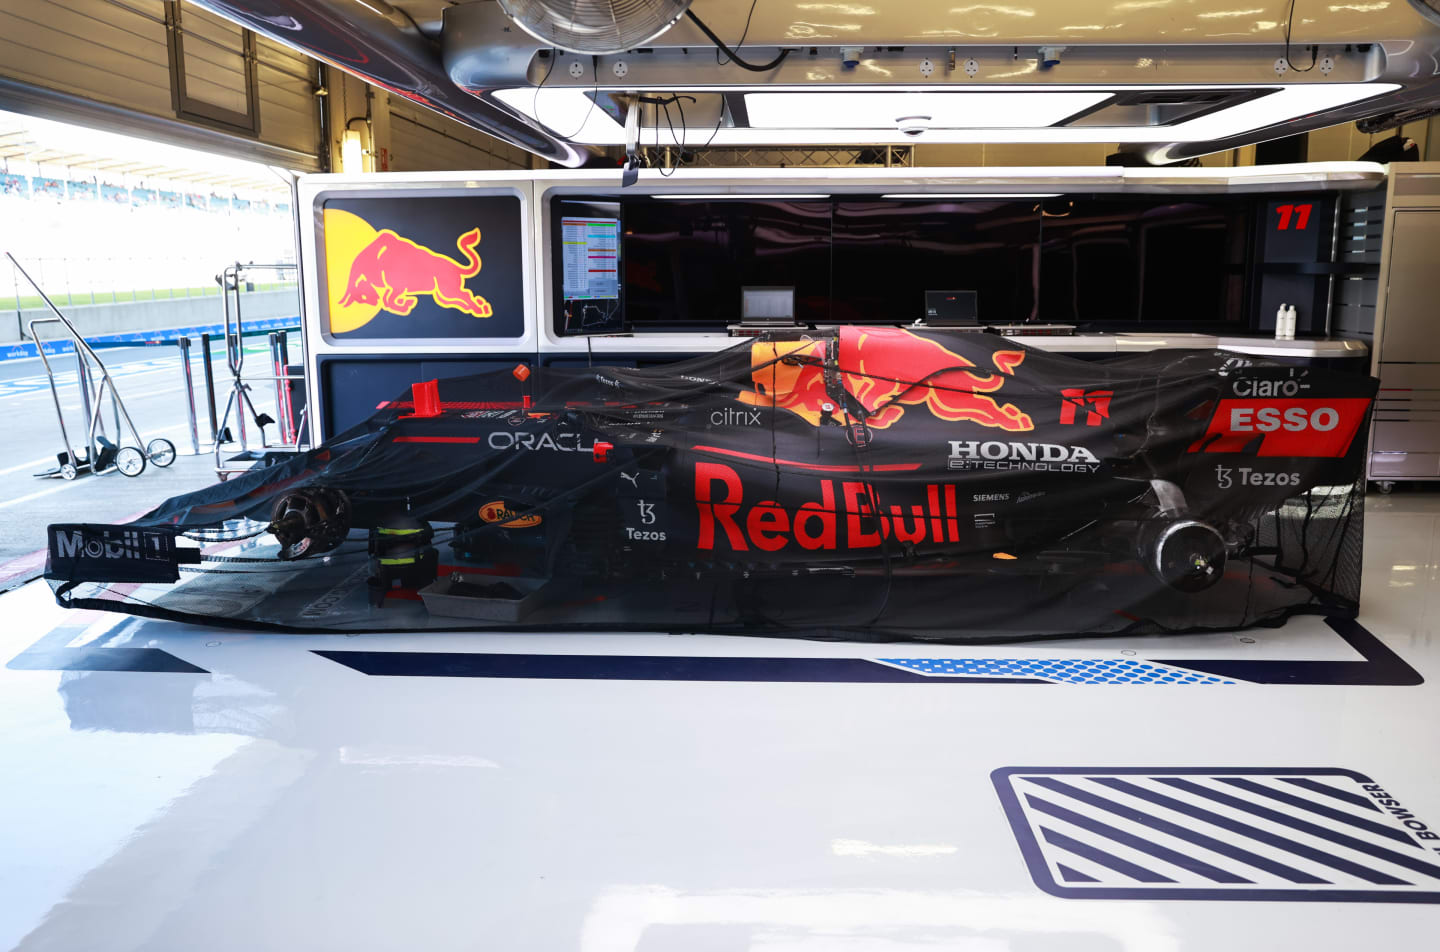 NORTHAMPTON, ENGLAND - JULY 18: The car of Sergio Perez of Mexico and Red Bull Racing is pictured